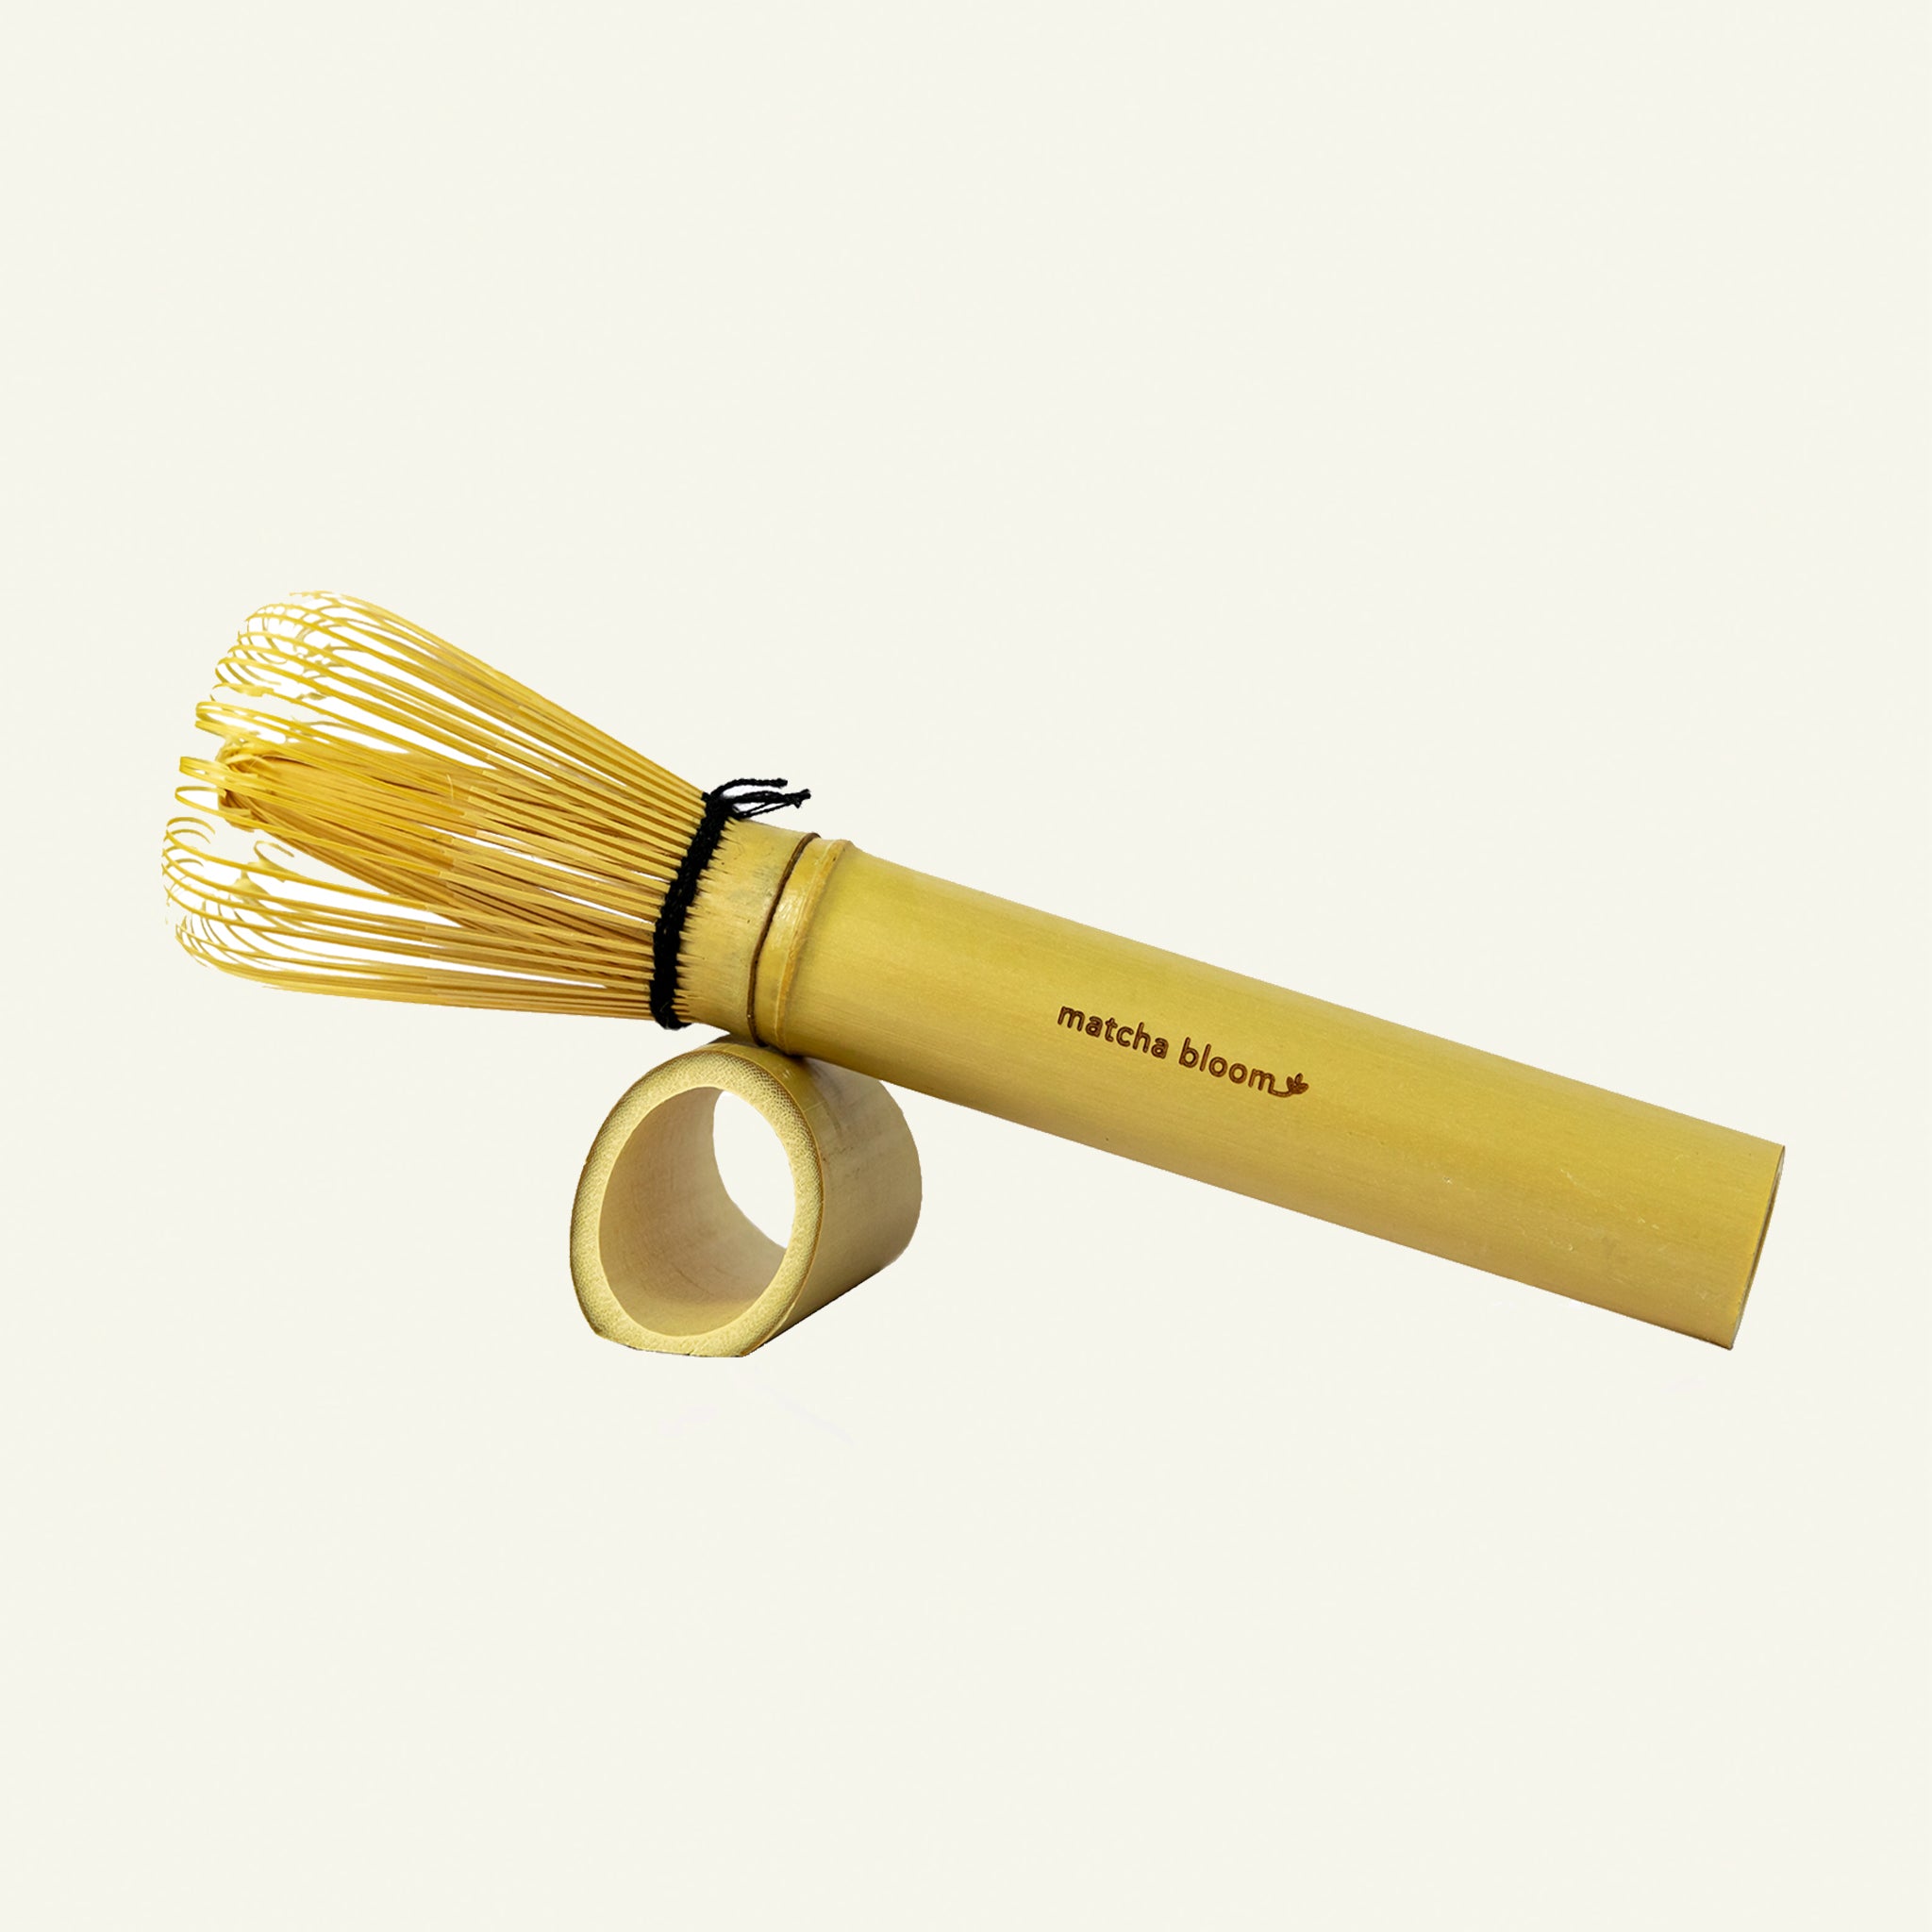 Promotional Silicone Whisk With Bamboo Handle